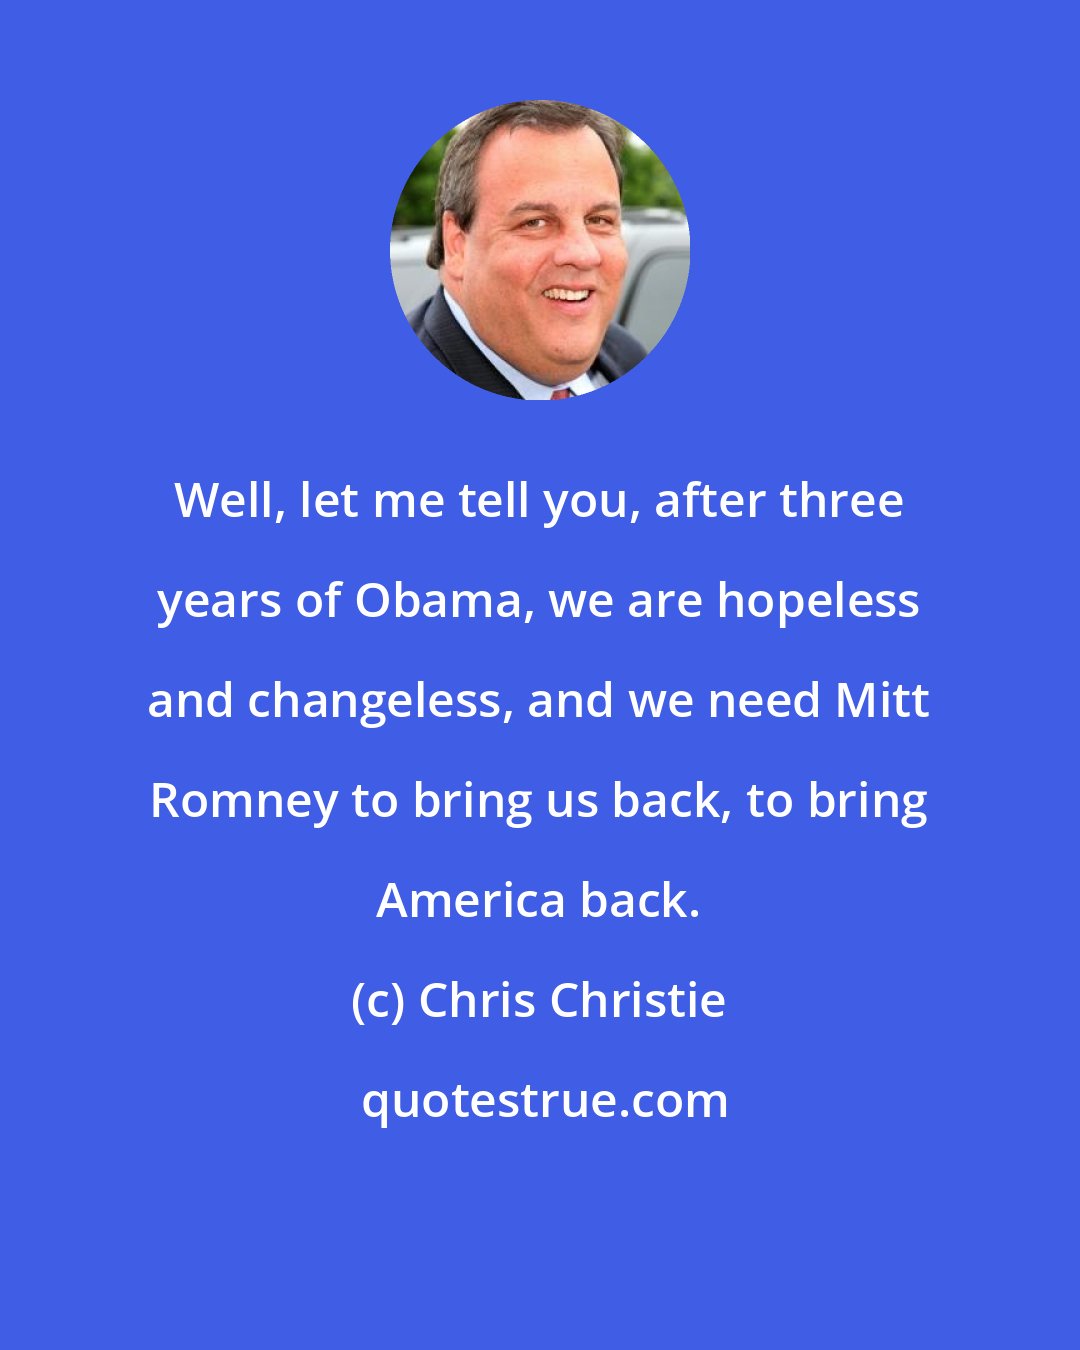 Chris Christie: Well, let me tell you, after three years of Obama, we are hopeless and changeless, and we need Mitt Romney to bring us back, to bring America back.